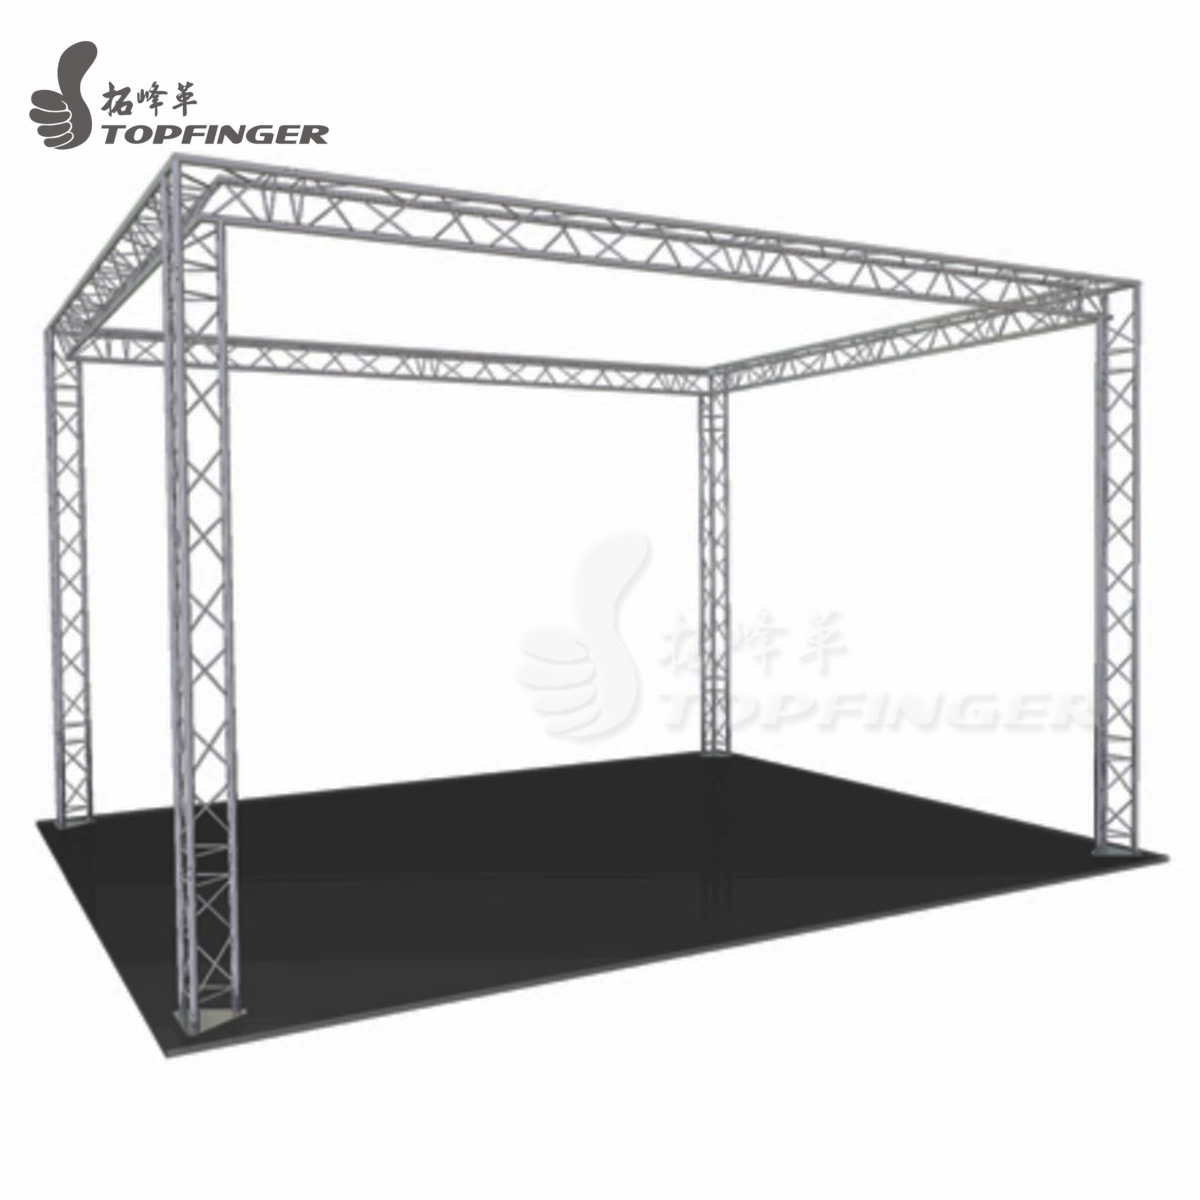 Topfinger factory used directly 300 x 300 mm aluminum triangle truss